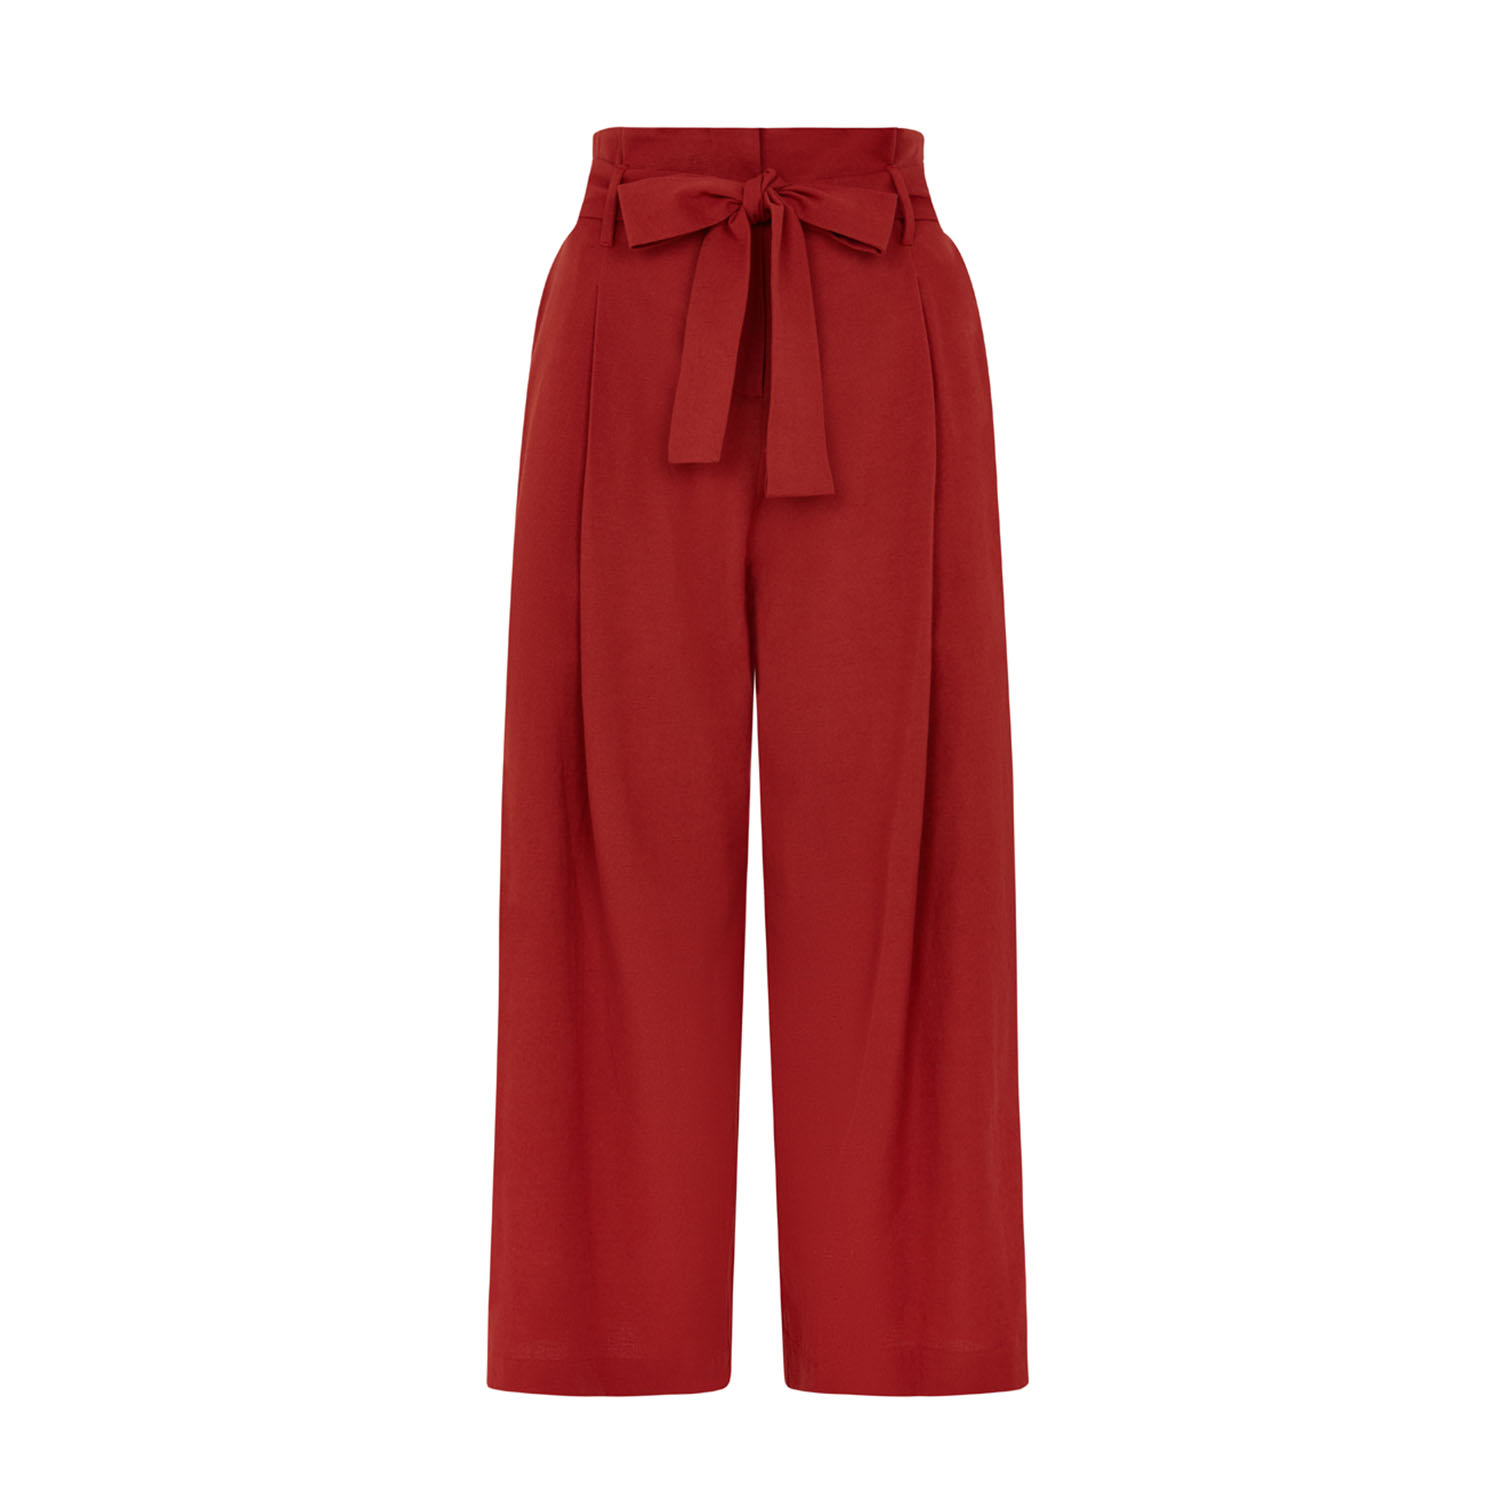 Emily And Fin Women's Red Gilda Cotton Linen Paprika Trouser